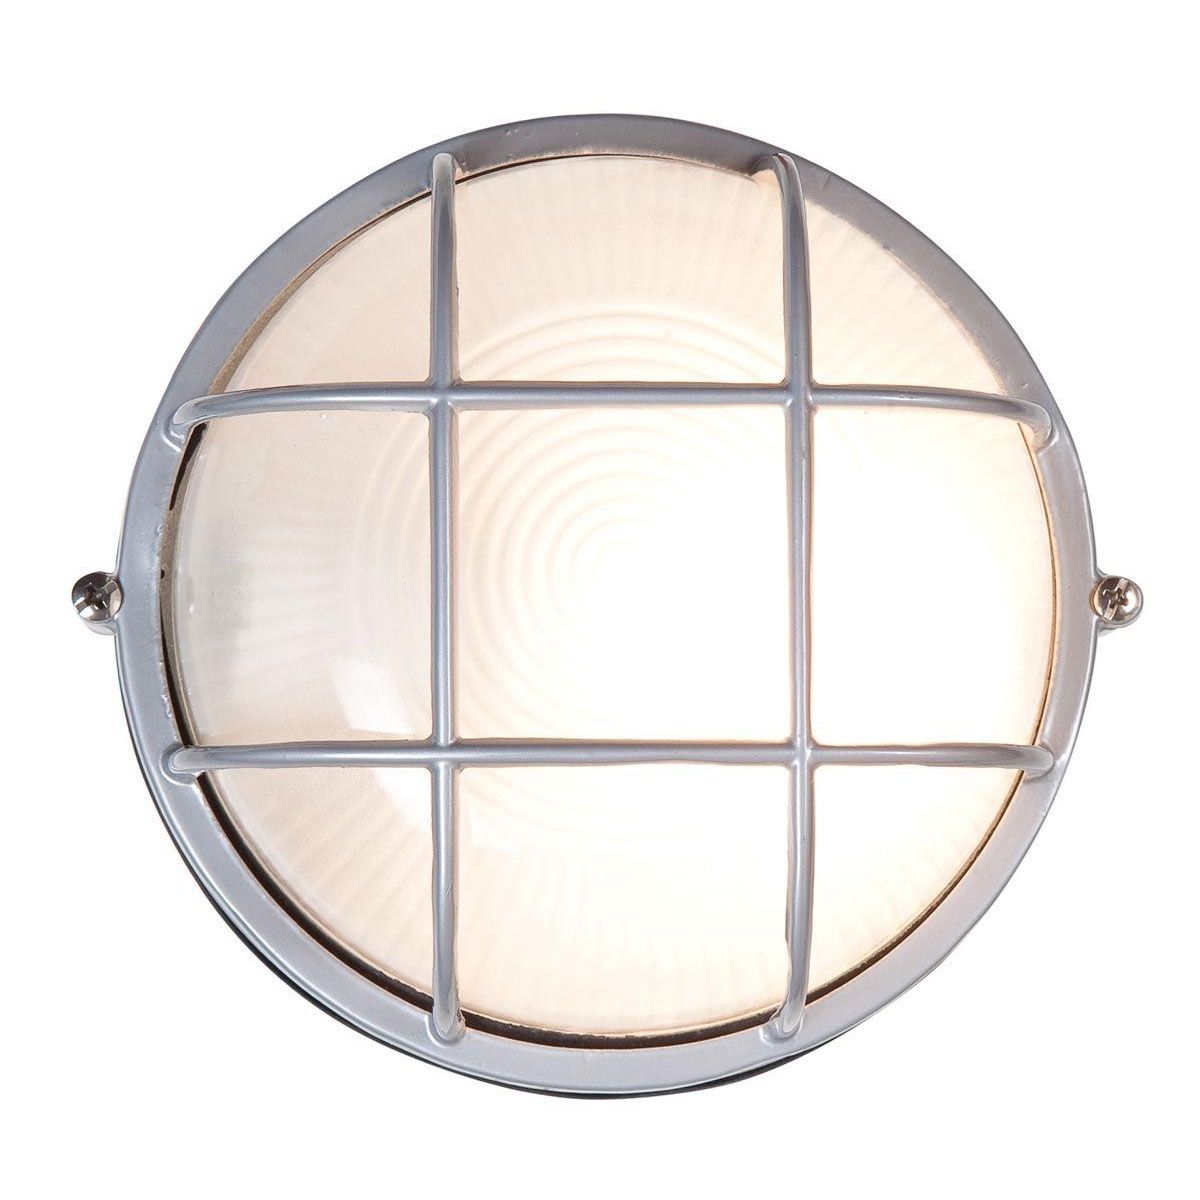 Round Outdoor Bulkhead Wall / Ceiling Lightaccess | 20296 Sat/fst With Regard To Outdoor Ceiling Bulkhead Lights (View 7 of 15)